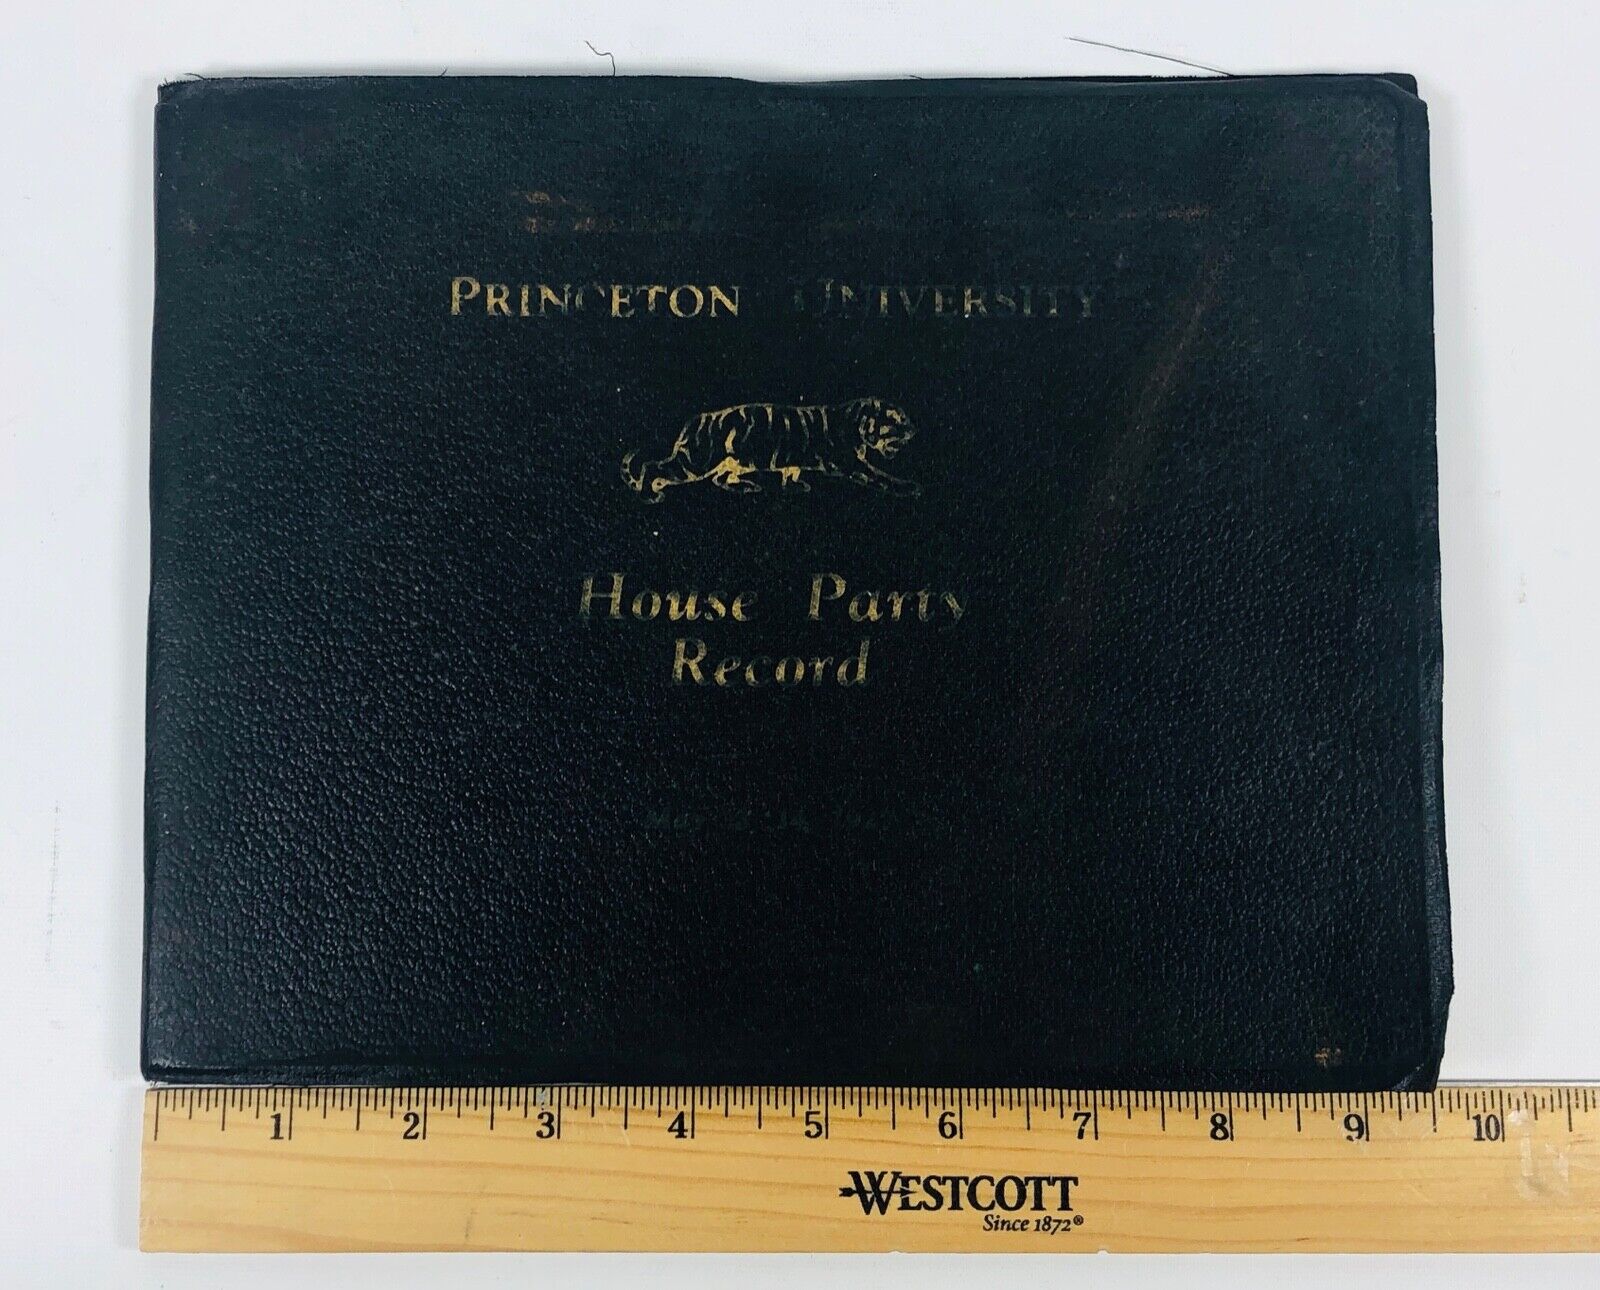 1927 Historical Princeton University House Party Record Book : May 13th & 14th